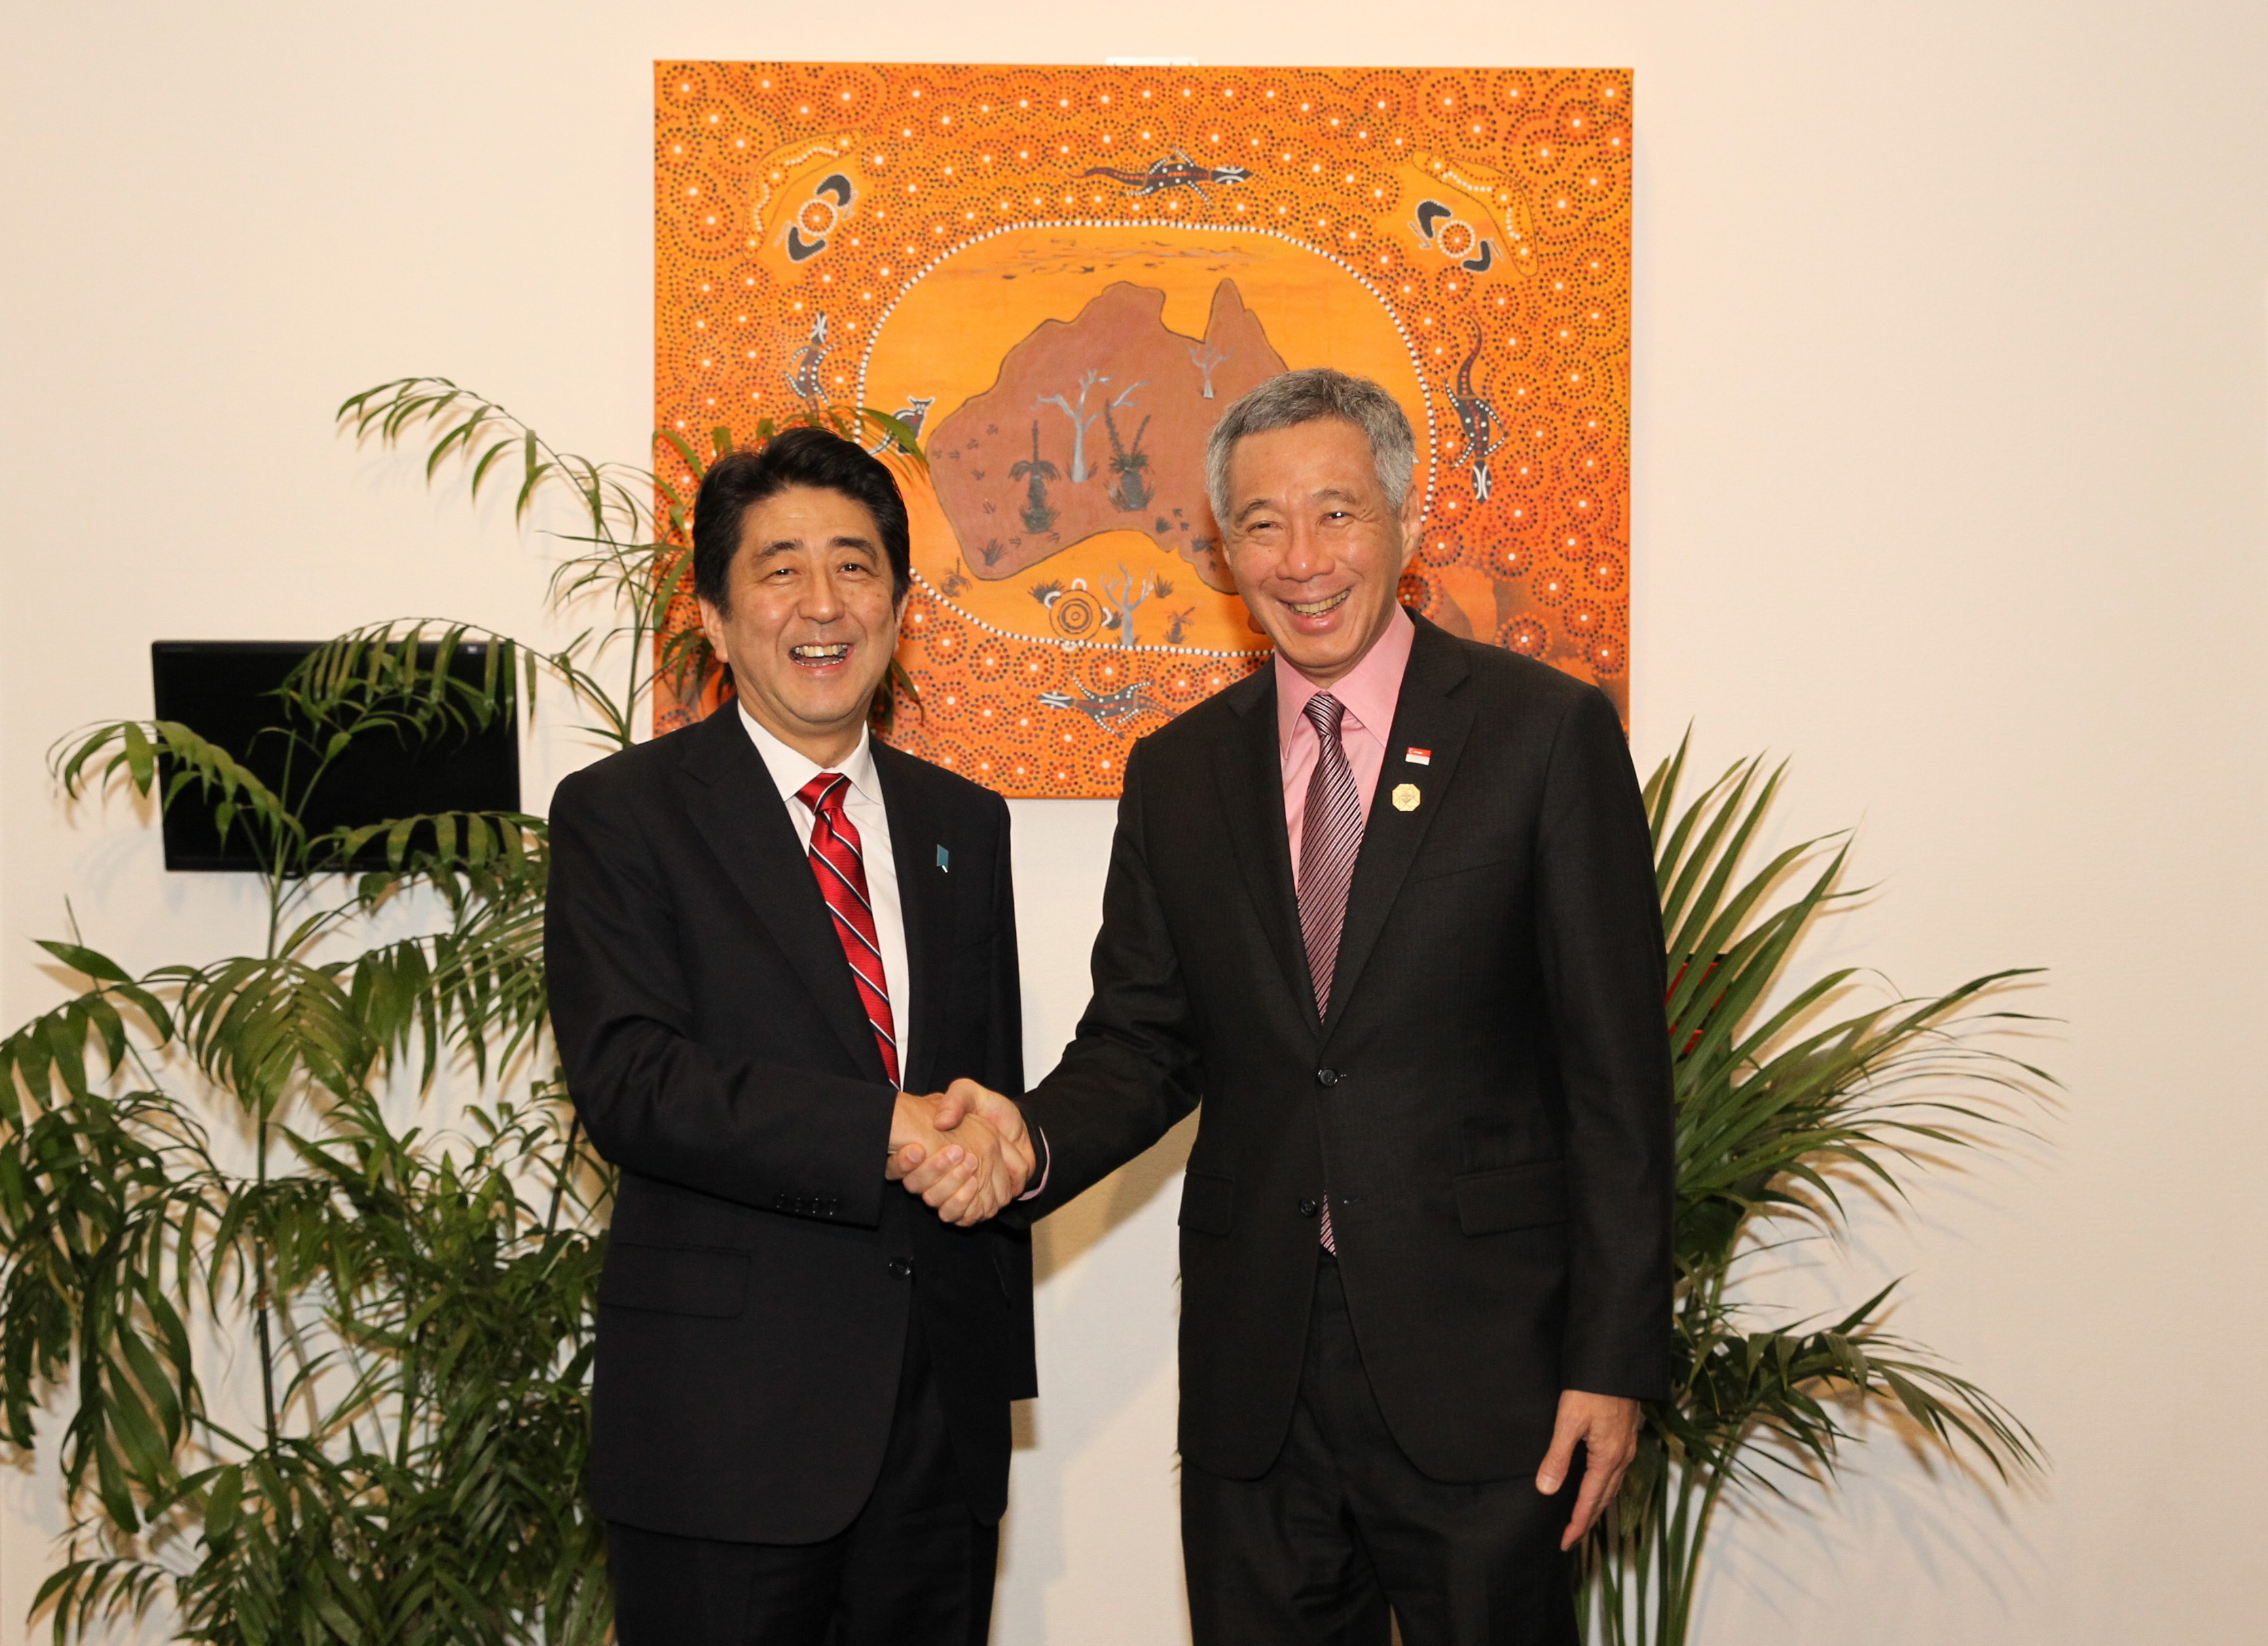 Prime Minister Lee Hsien Loong meeting Japanese Prime Minister Shinzo Abe at the G20 Summit on 15 to 16 November in Brisbane, Australia (MCI Photo by Chwee)